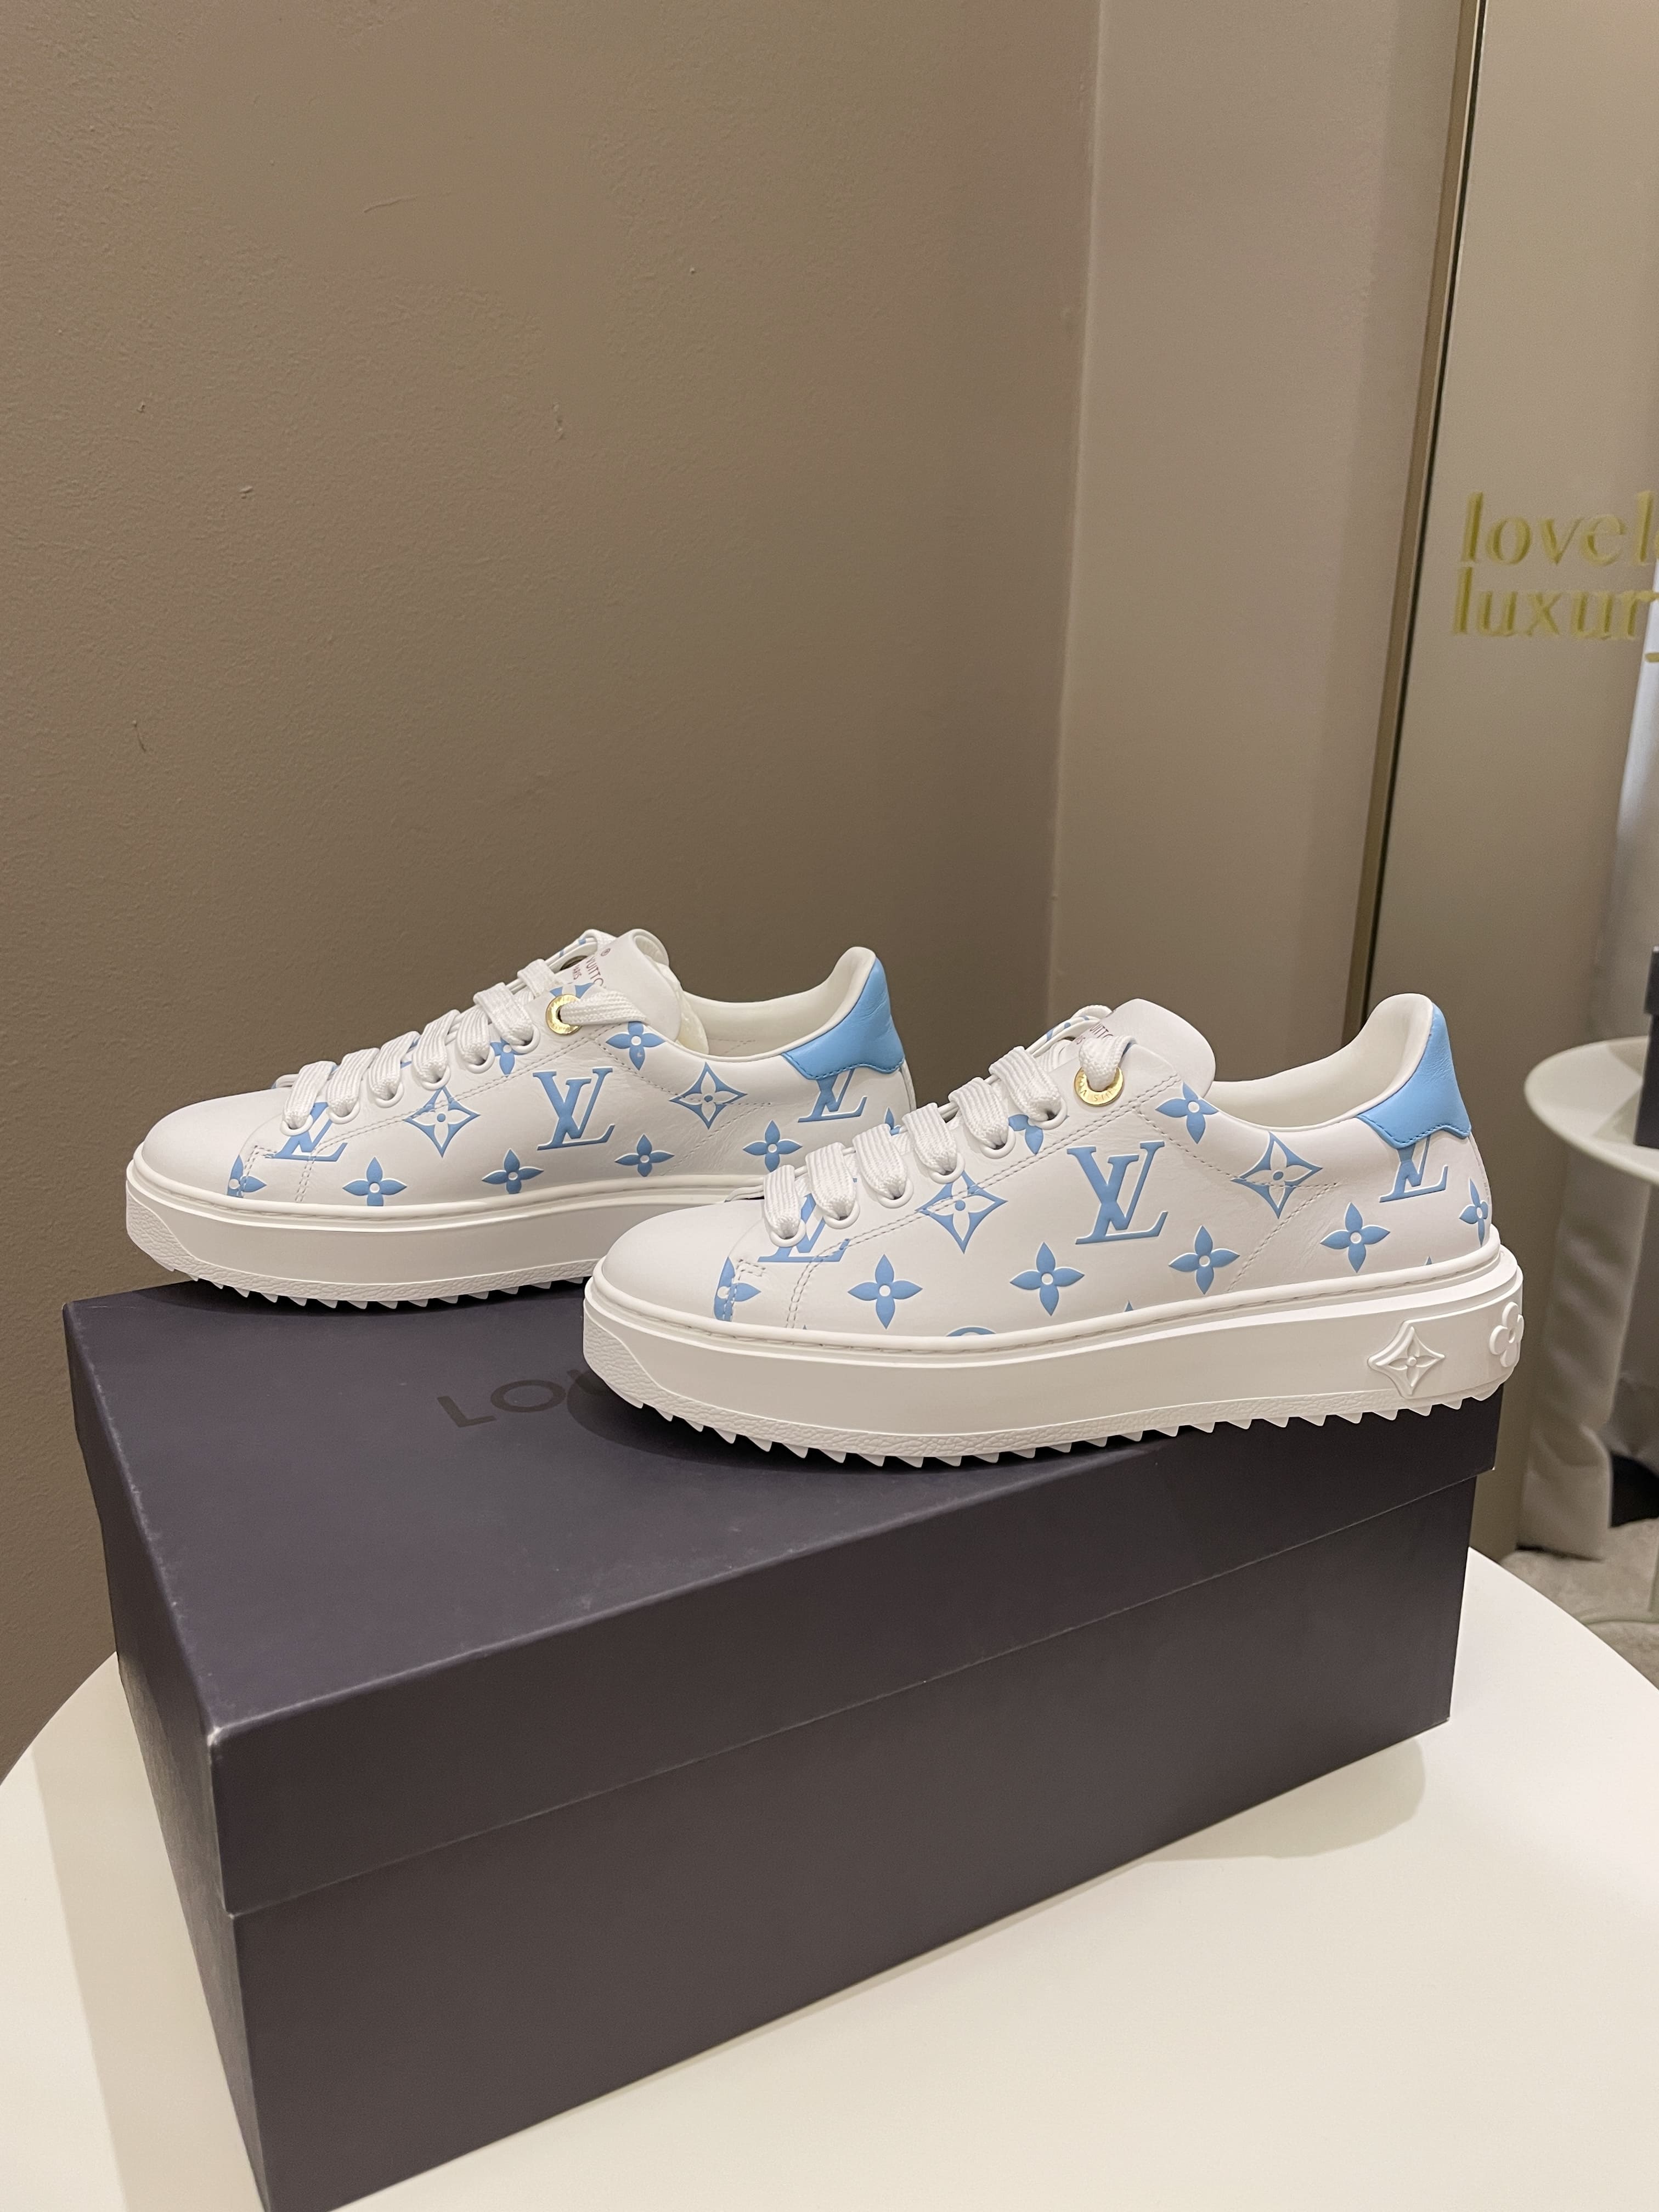 Louis Vuitton Escale Time Out Sneakers